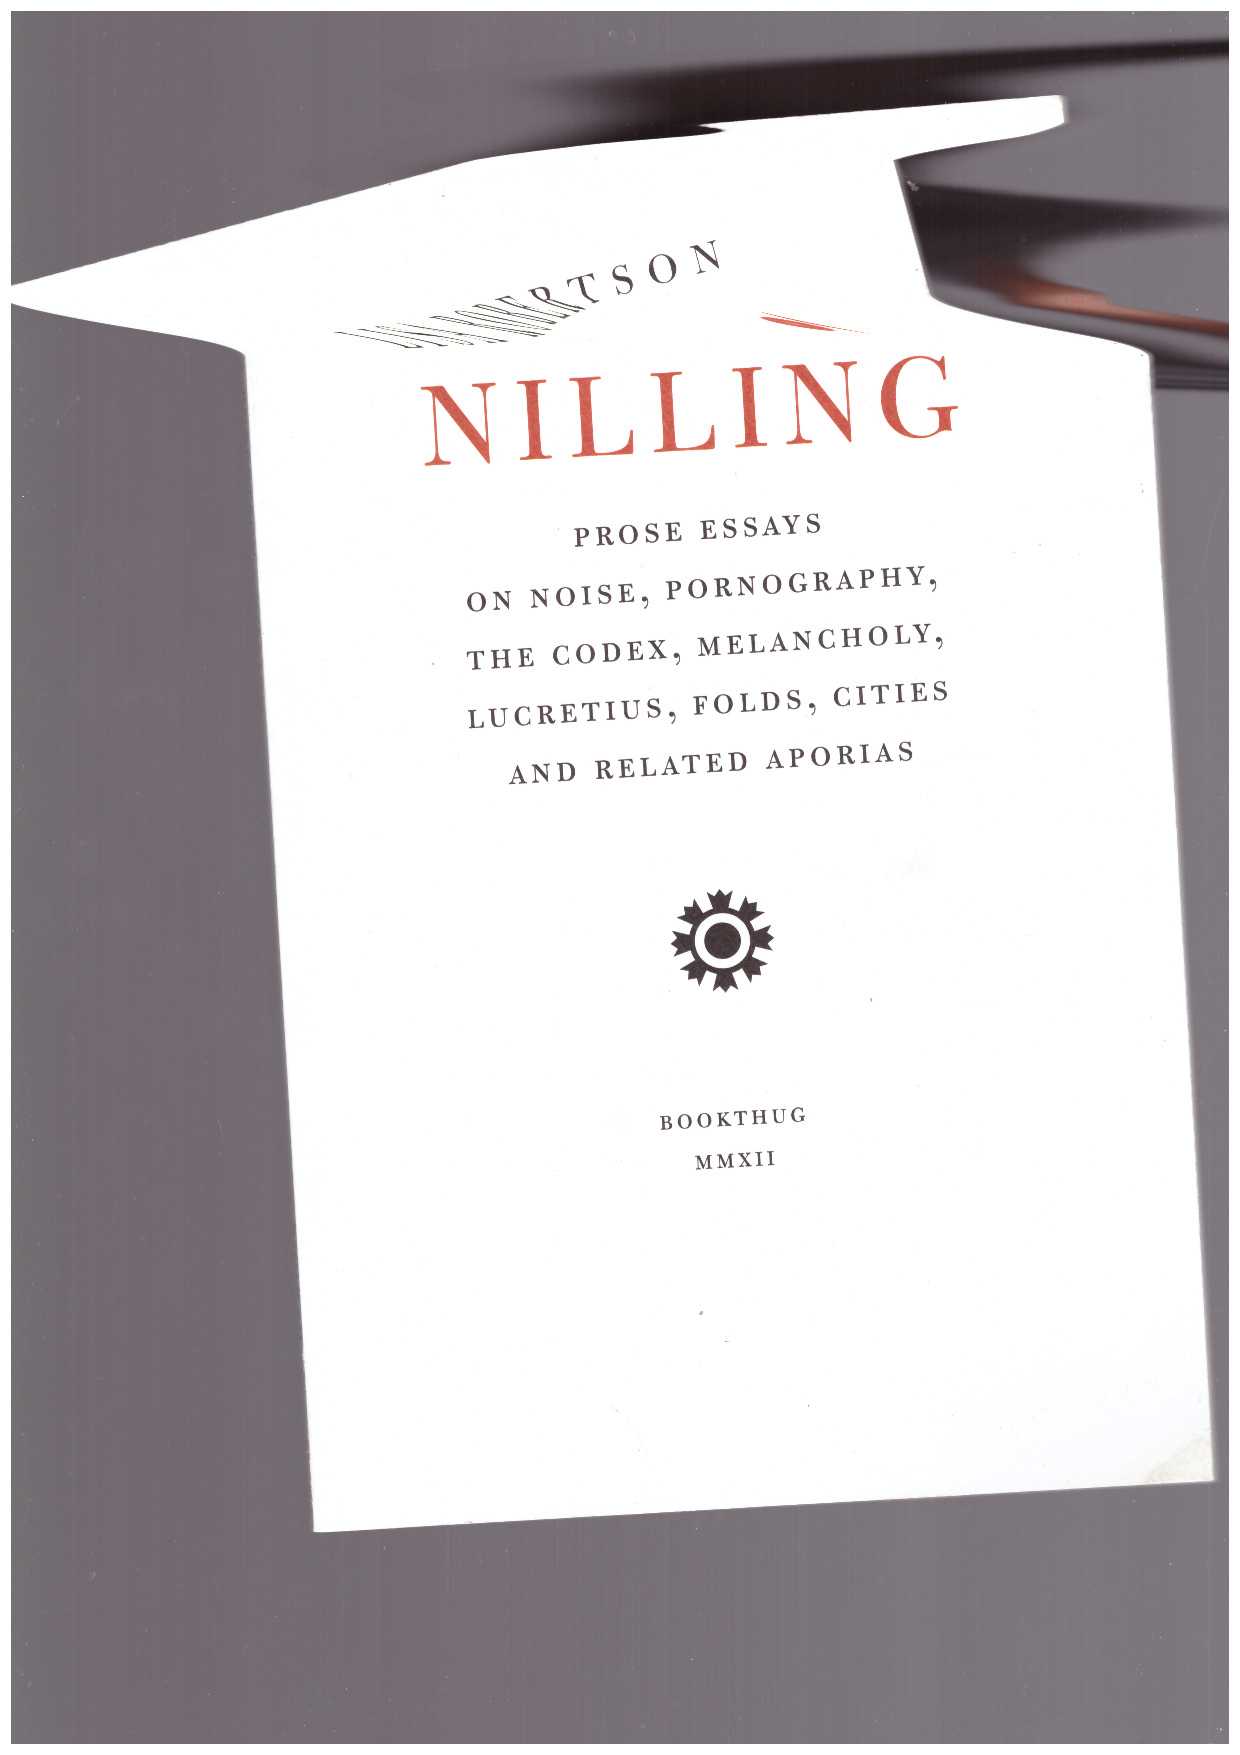 ROBERTSON, Lisa - Nilling. Prose Essays on Noise, Pornography, The Codex, Melancholy, Lucretiun, Folds, Cities and Related Aporias